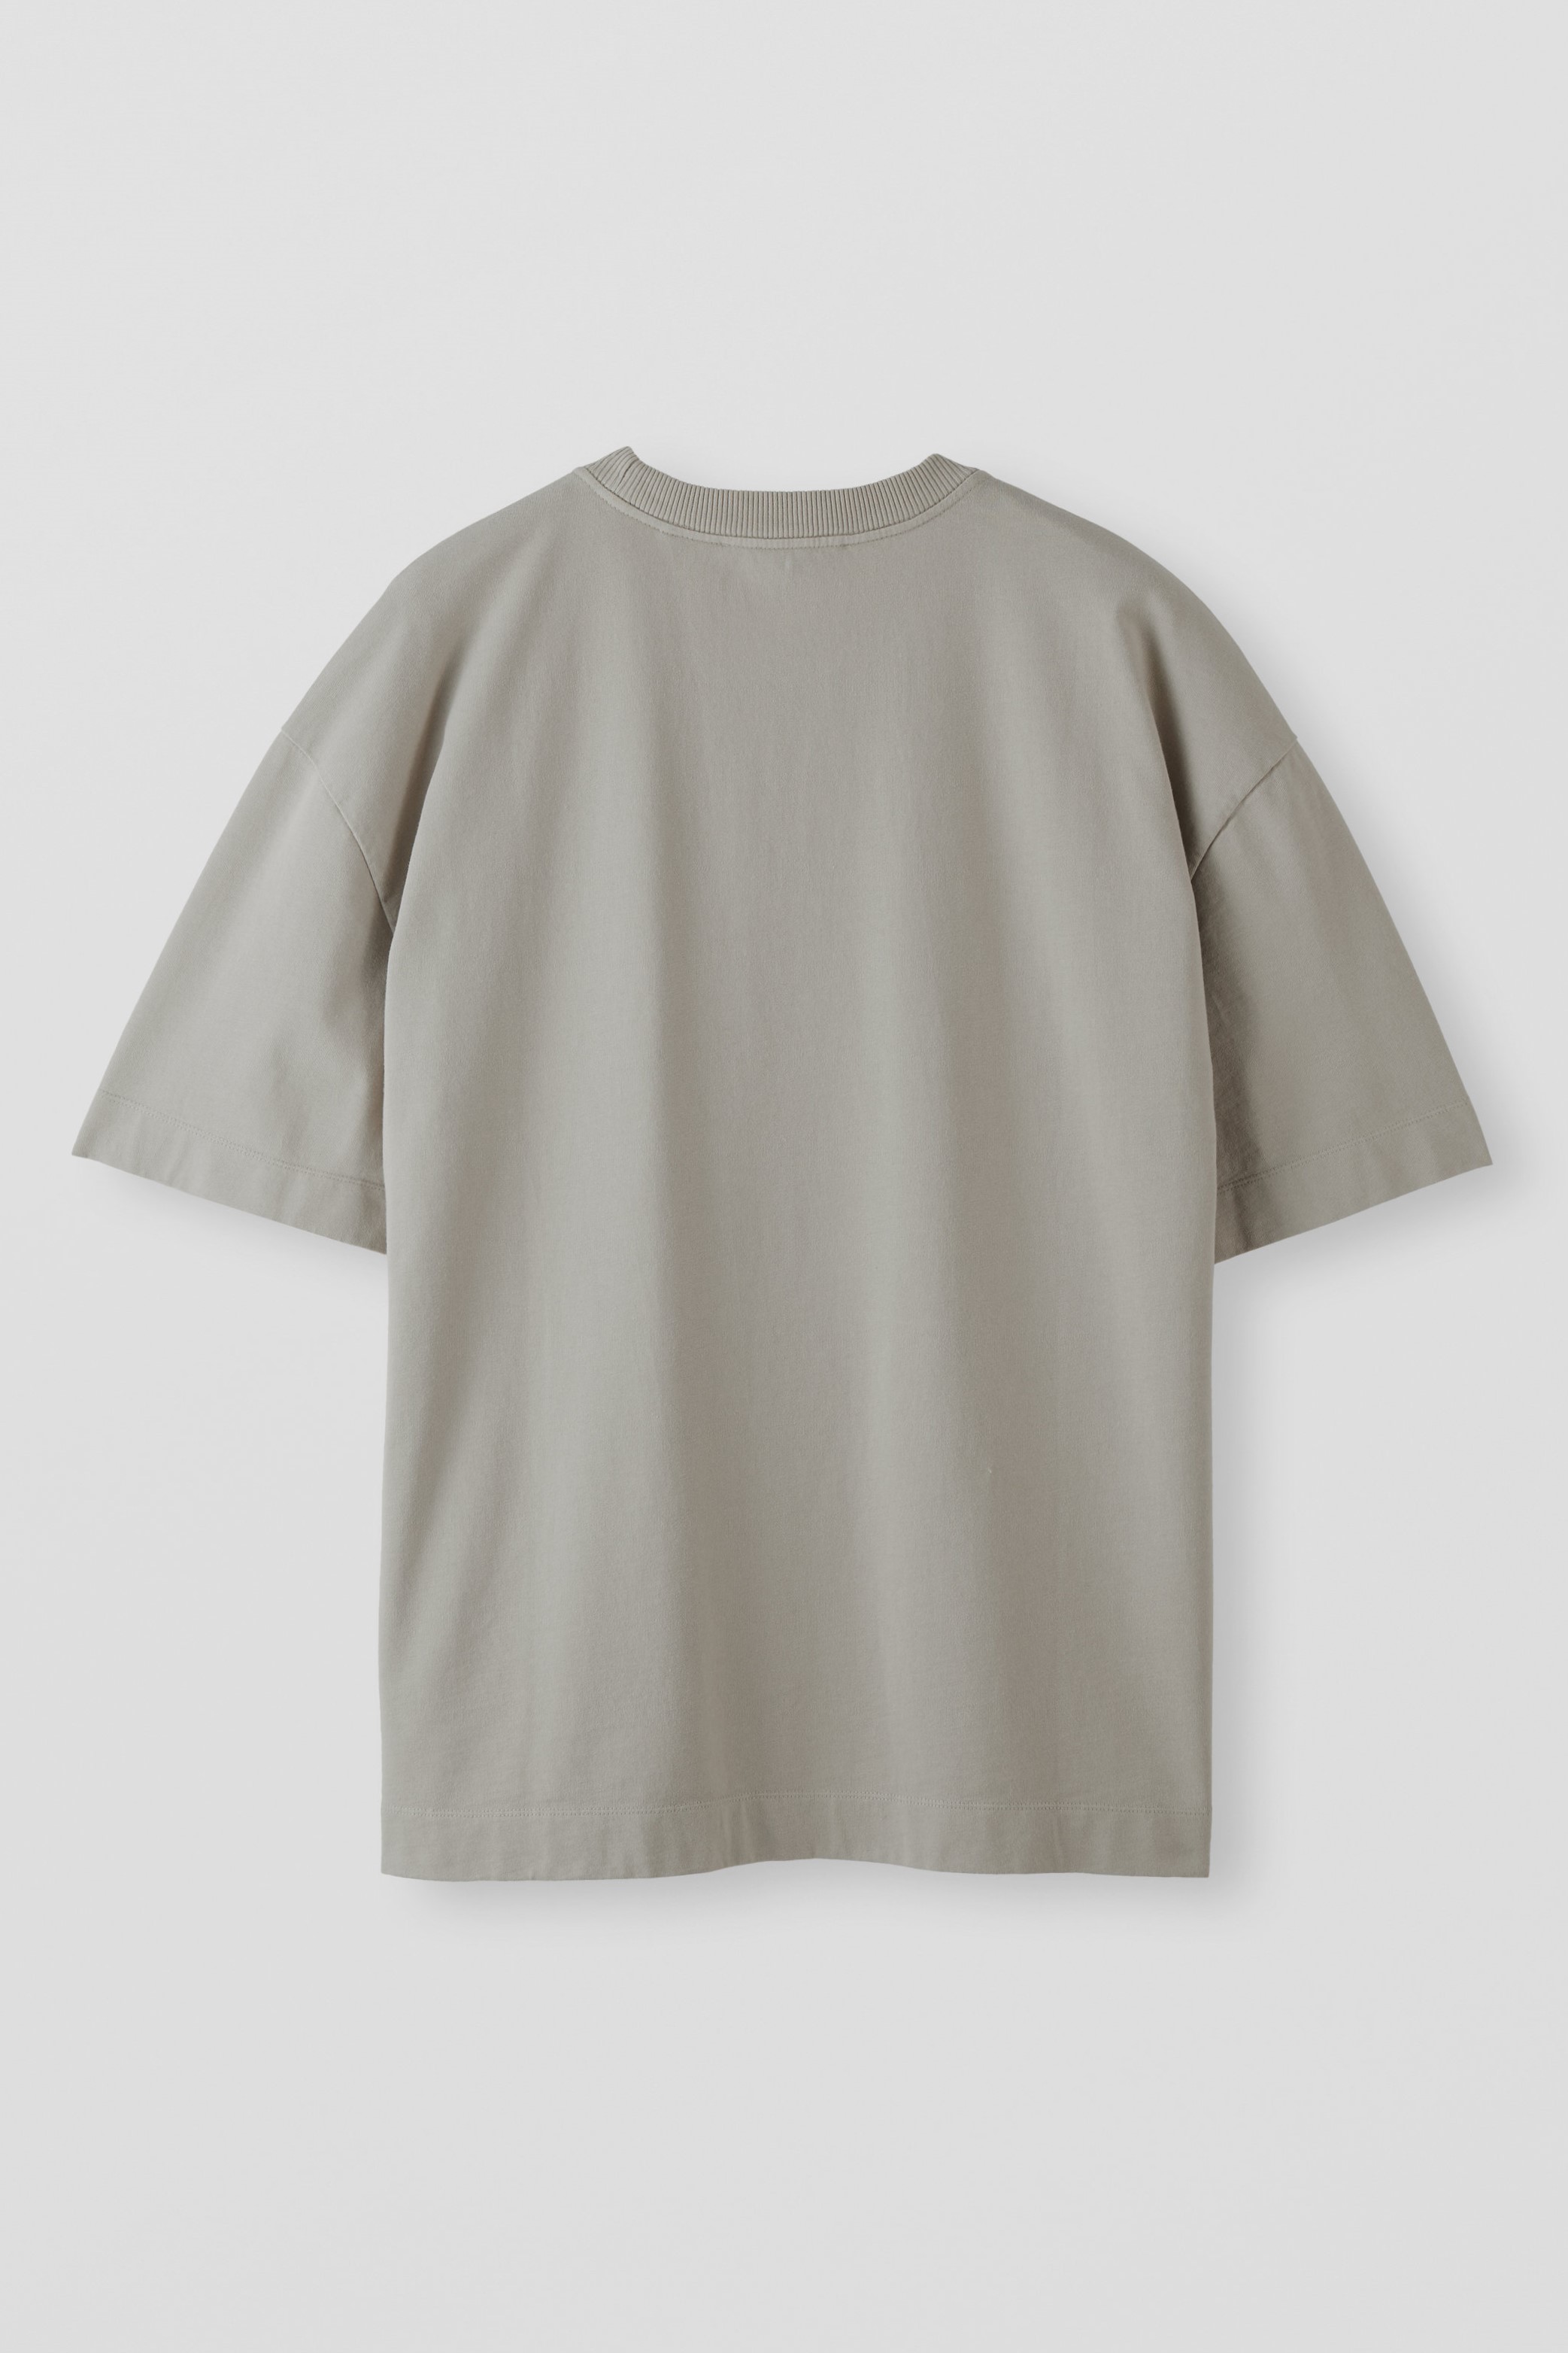 APPLIED ART FORMS Oversize T-Shirt in Ghost Grey XL